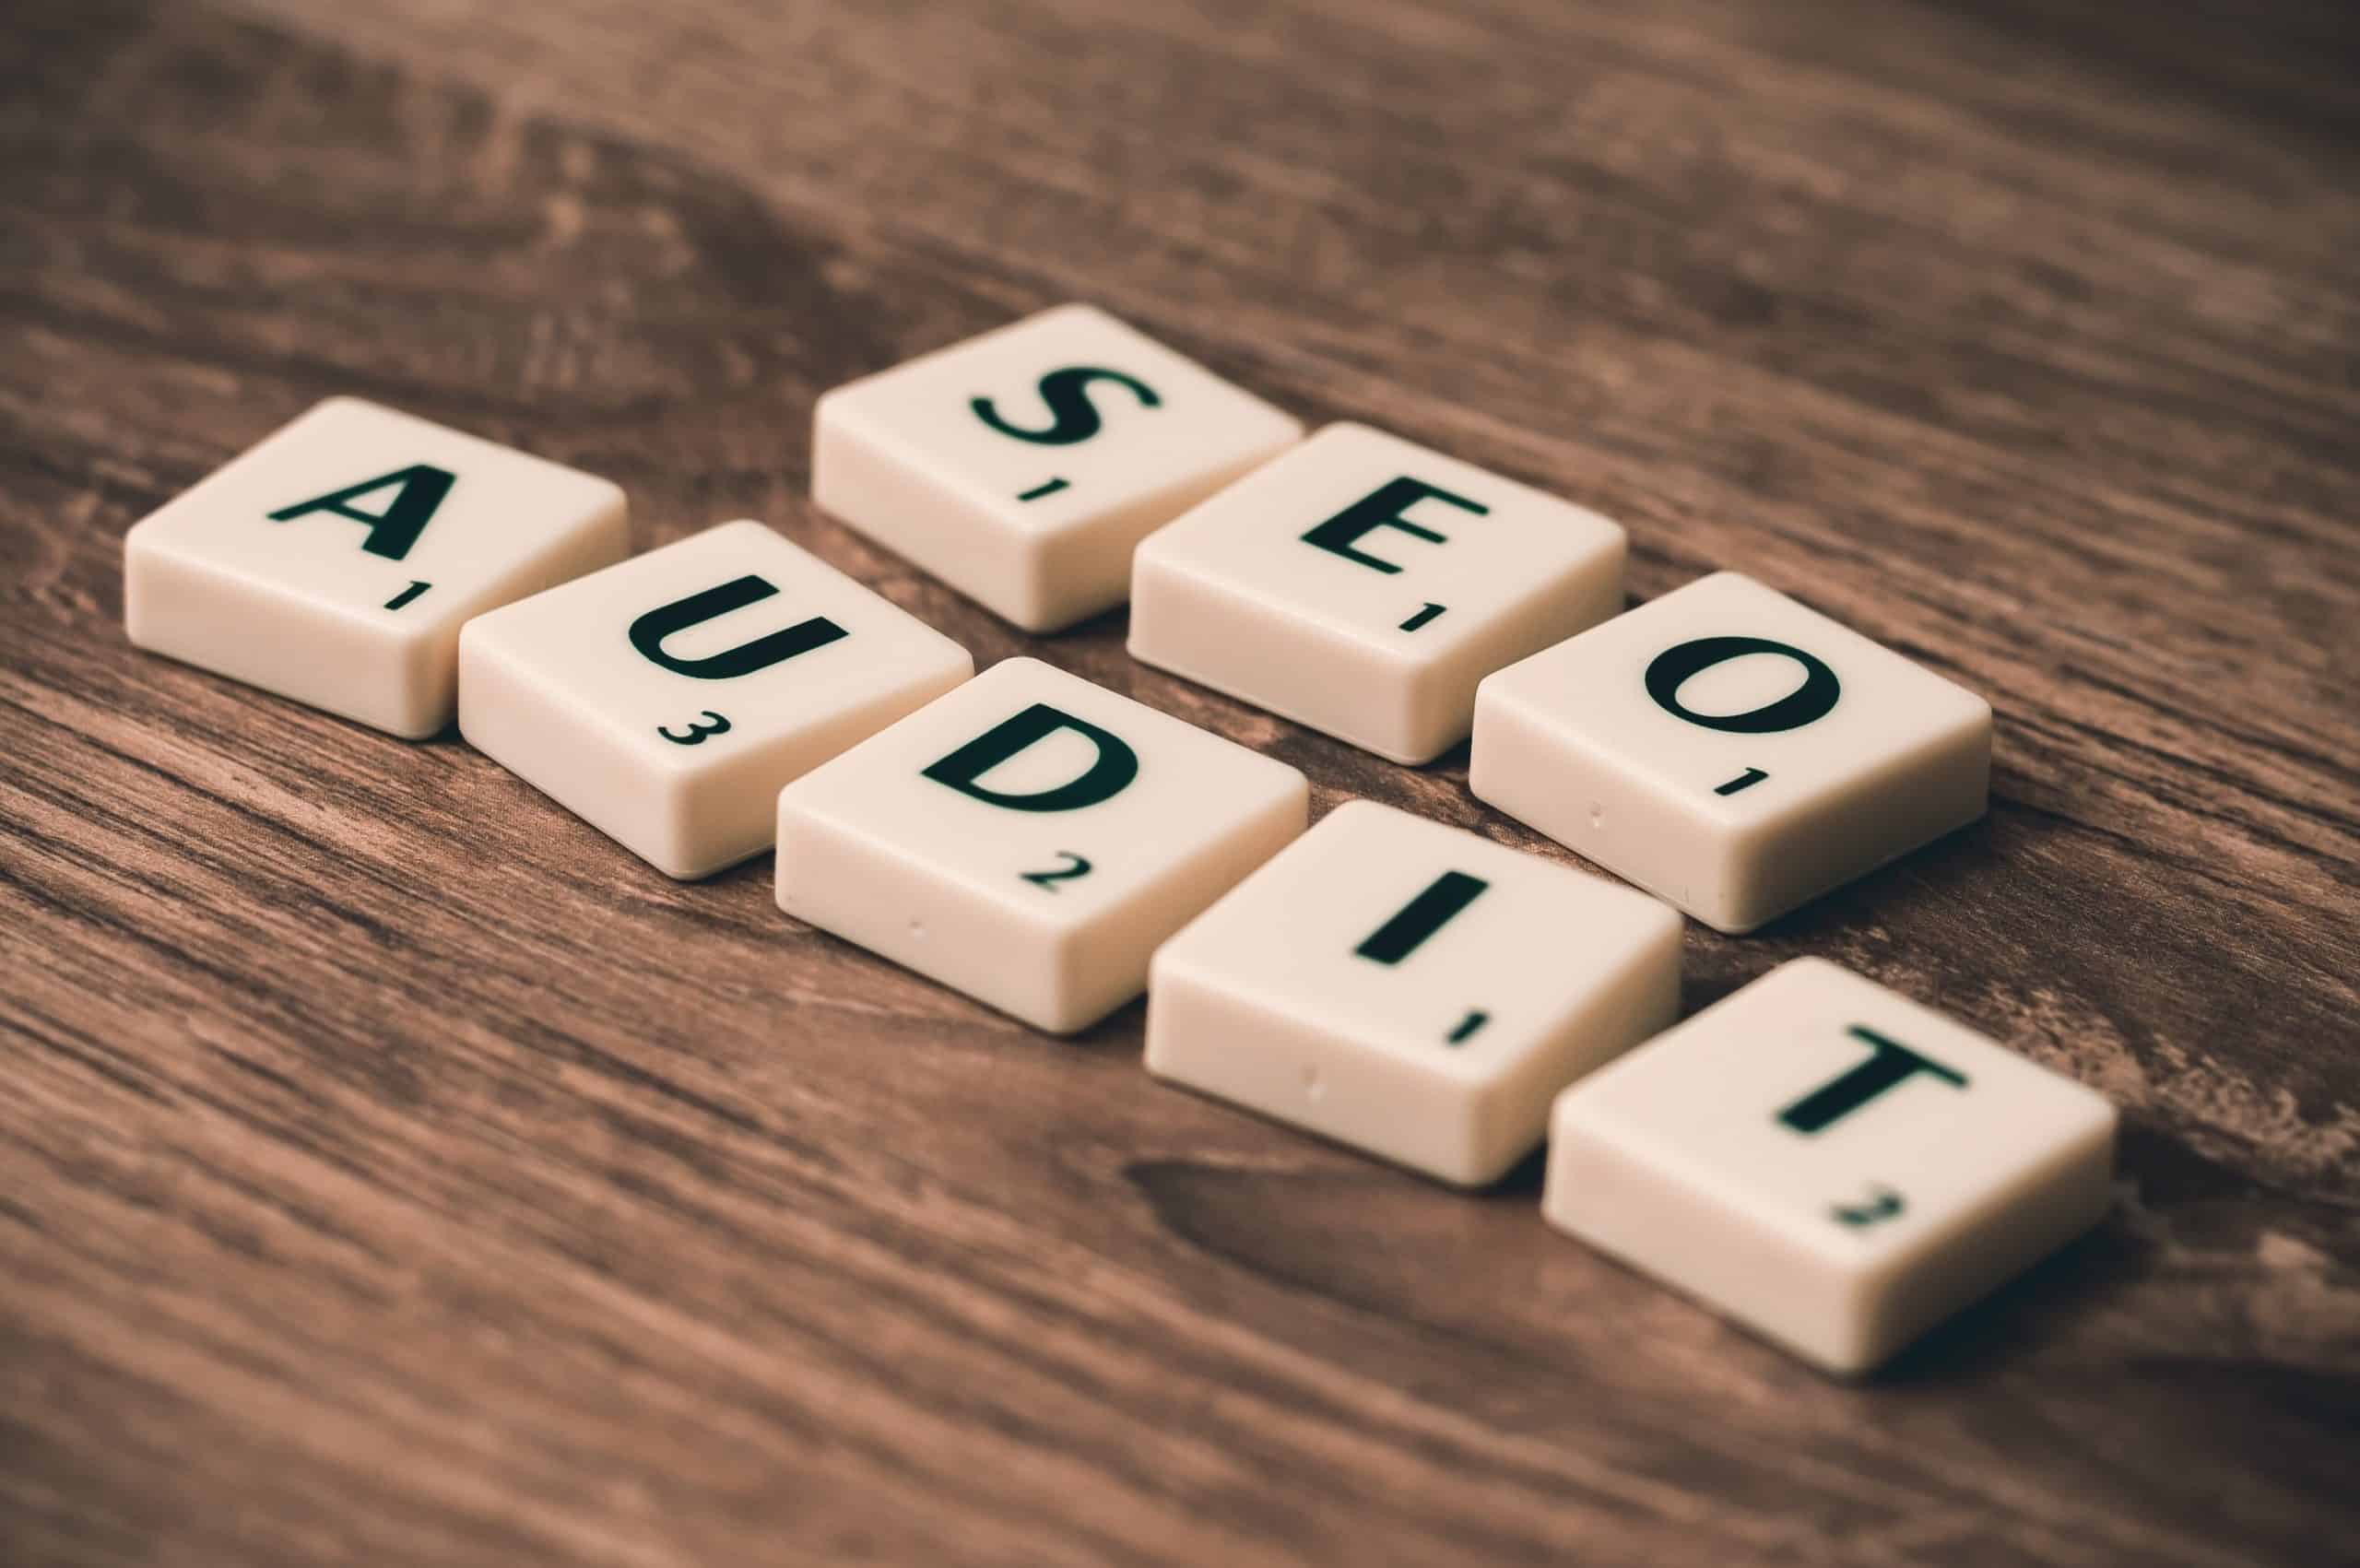 Search friendly website? Answer is simple: Audit SEO.